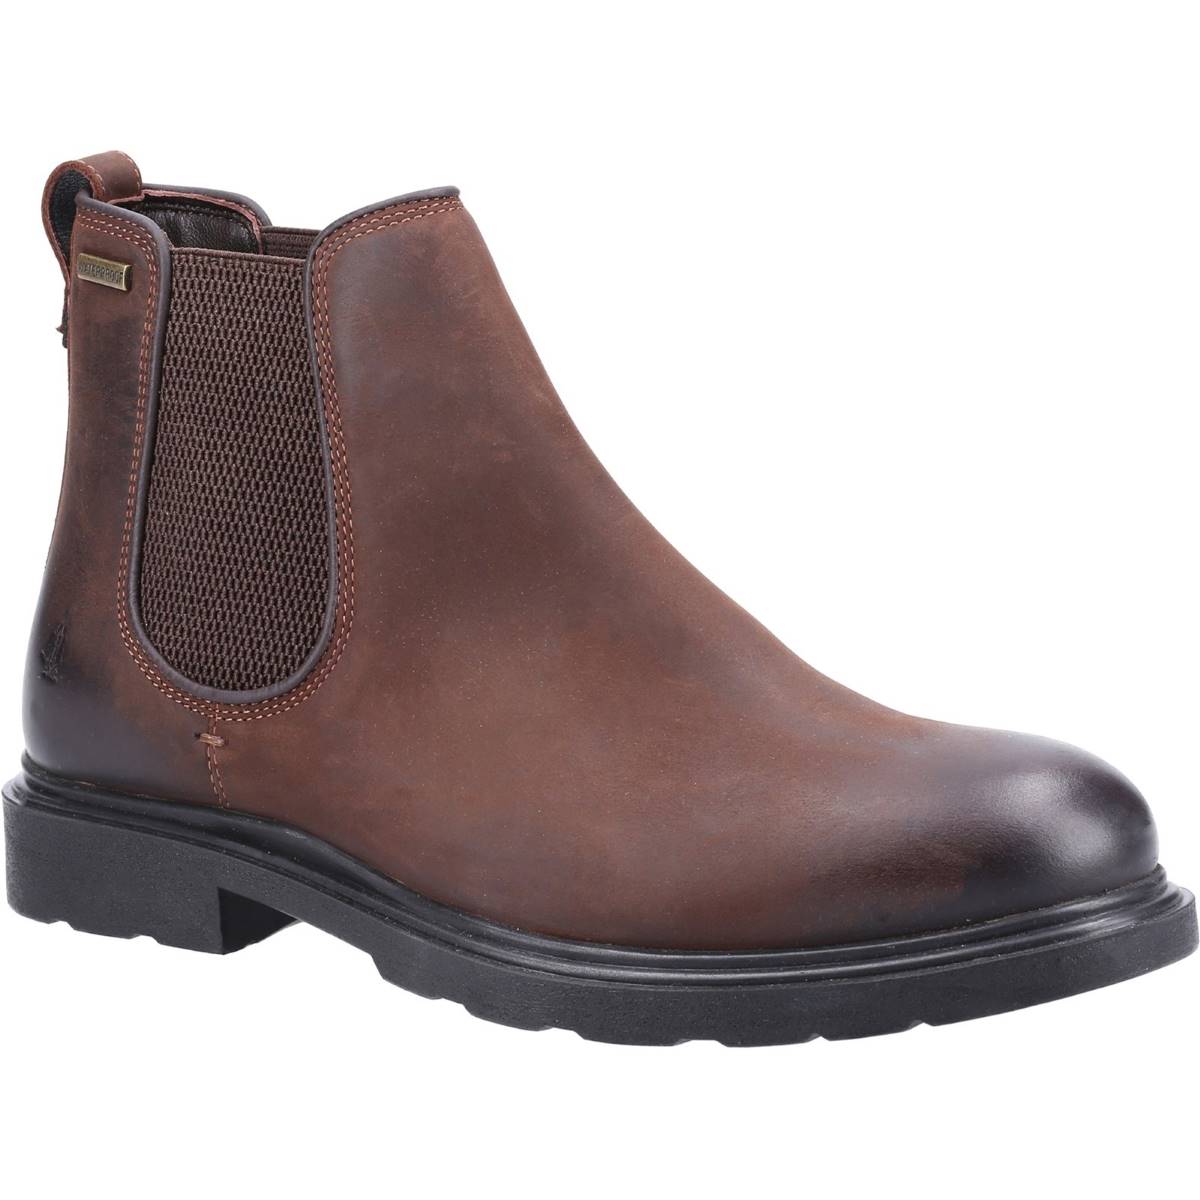 Hush Puppies Preston Chelsea Brown Mens boots HPM2000-232-1 in a Plain Leather in Size 7